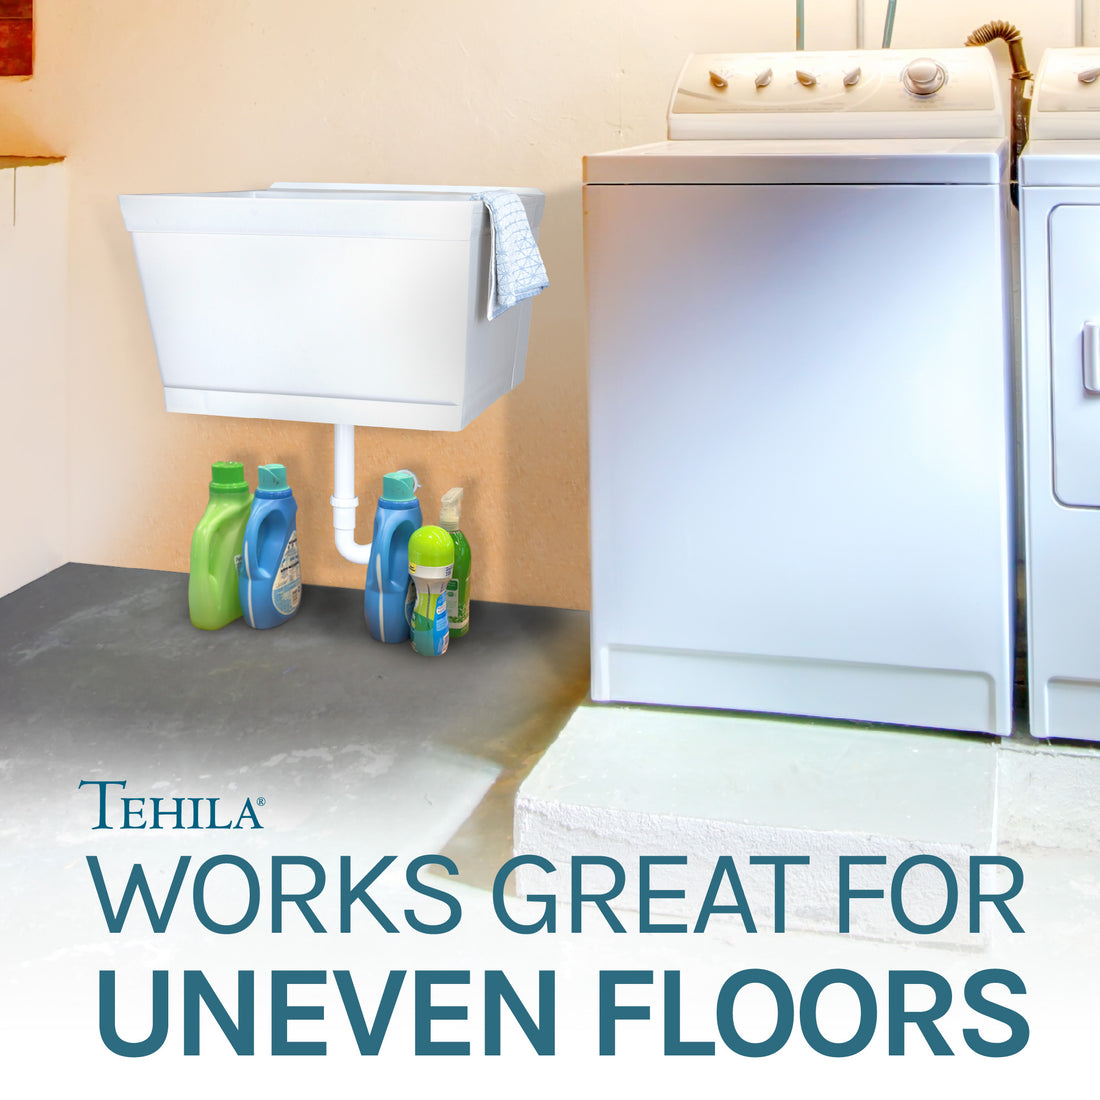 Utility Sink Works Great for Uneven Floors